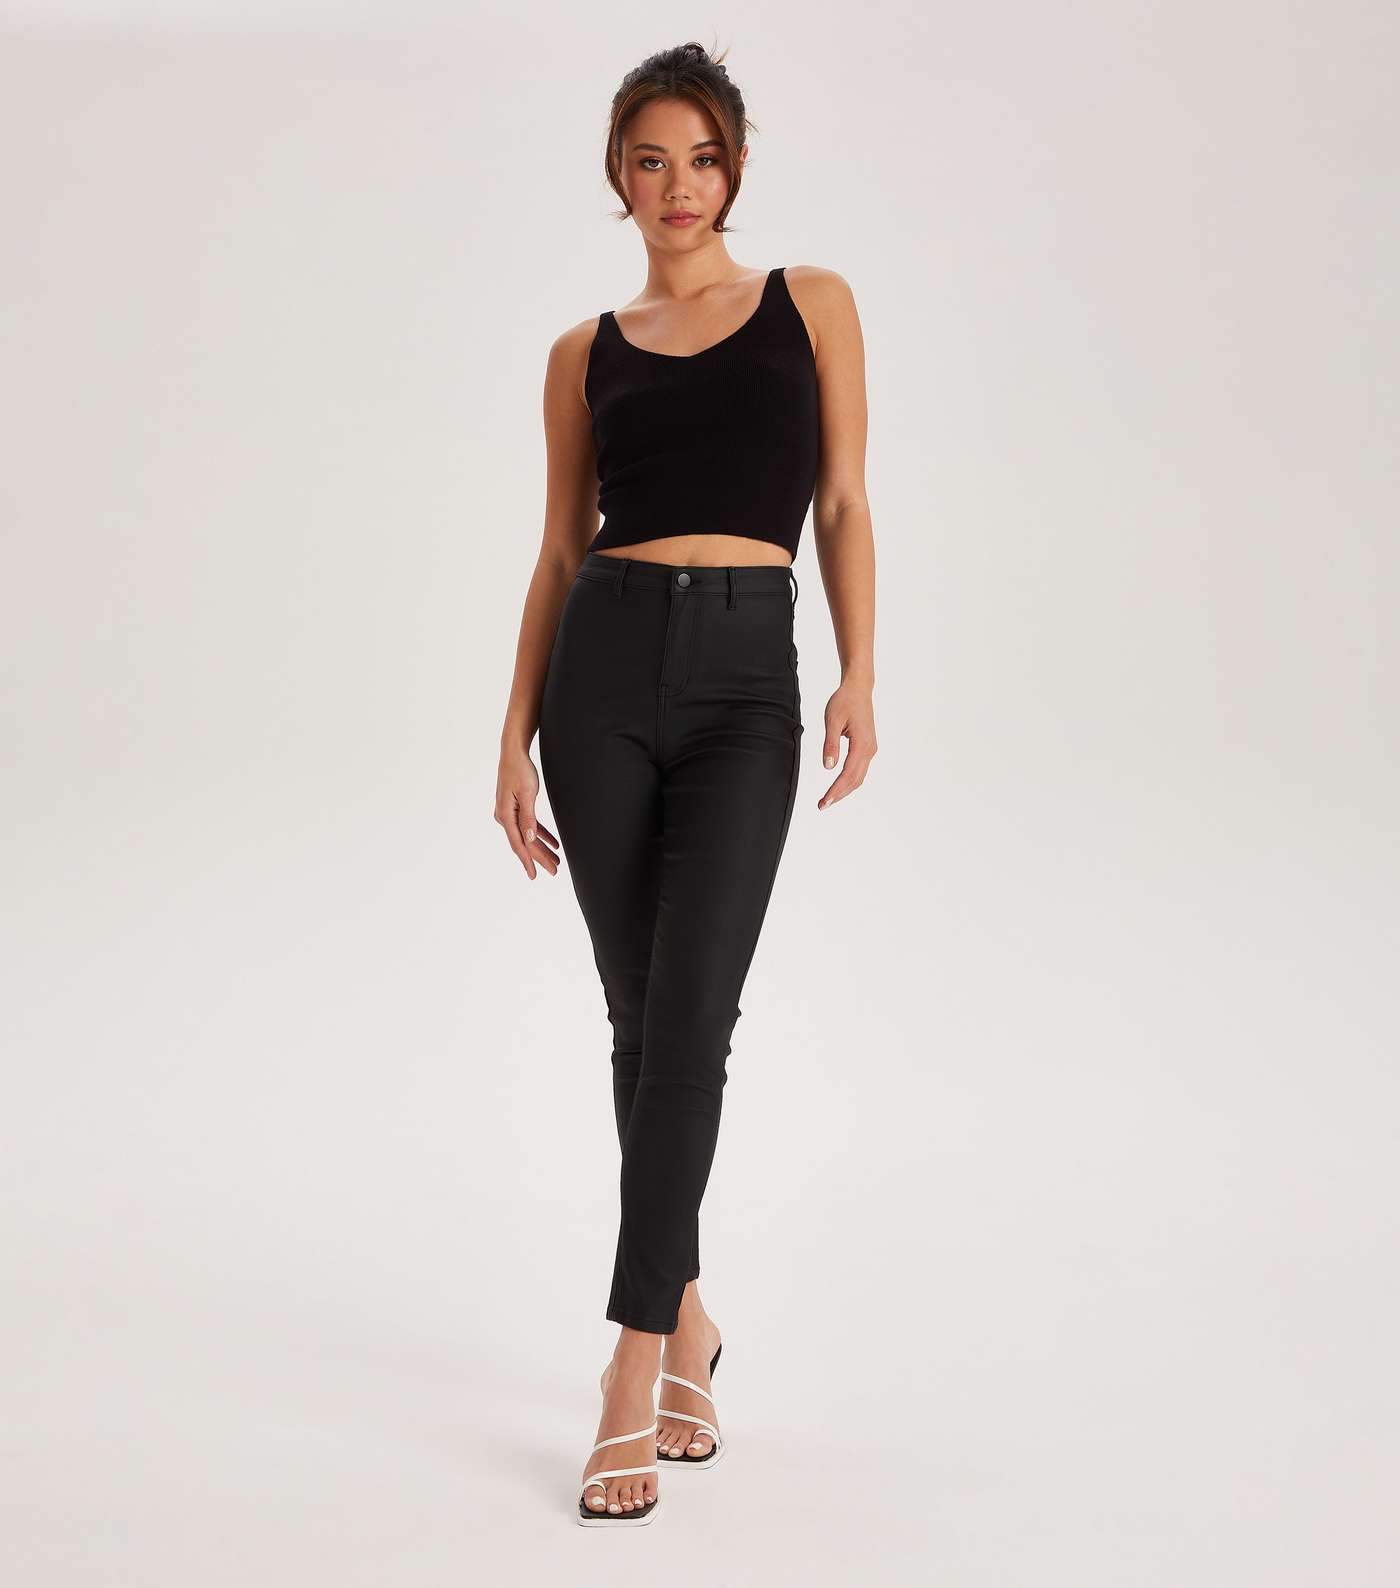 Urban Bliss Black Coated Leather-Look Super Skinny Jeans Image 2